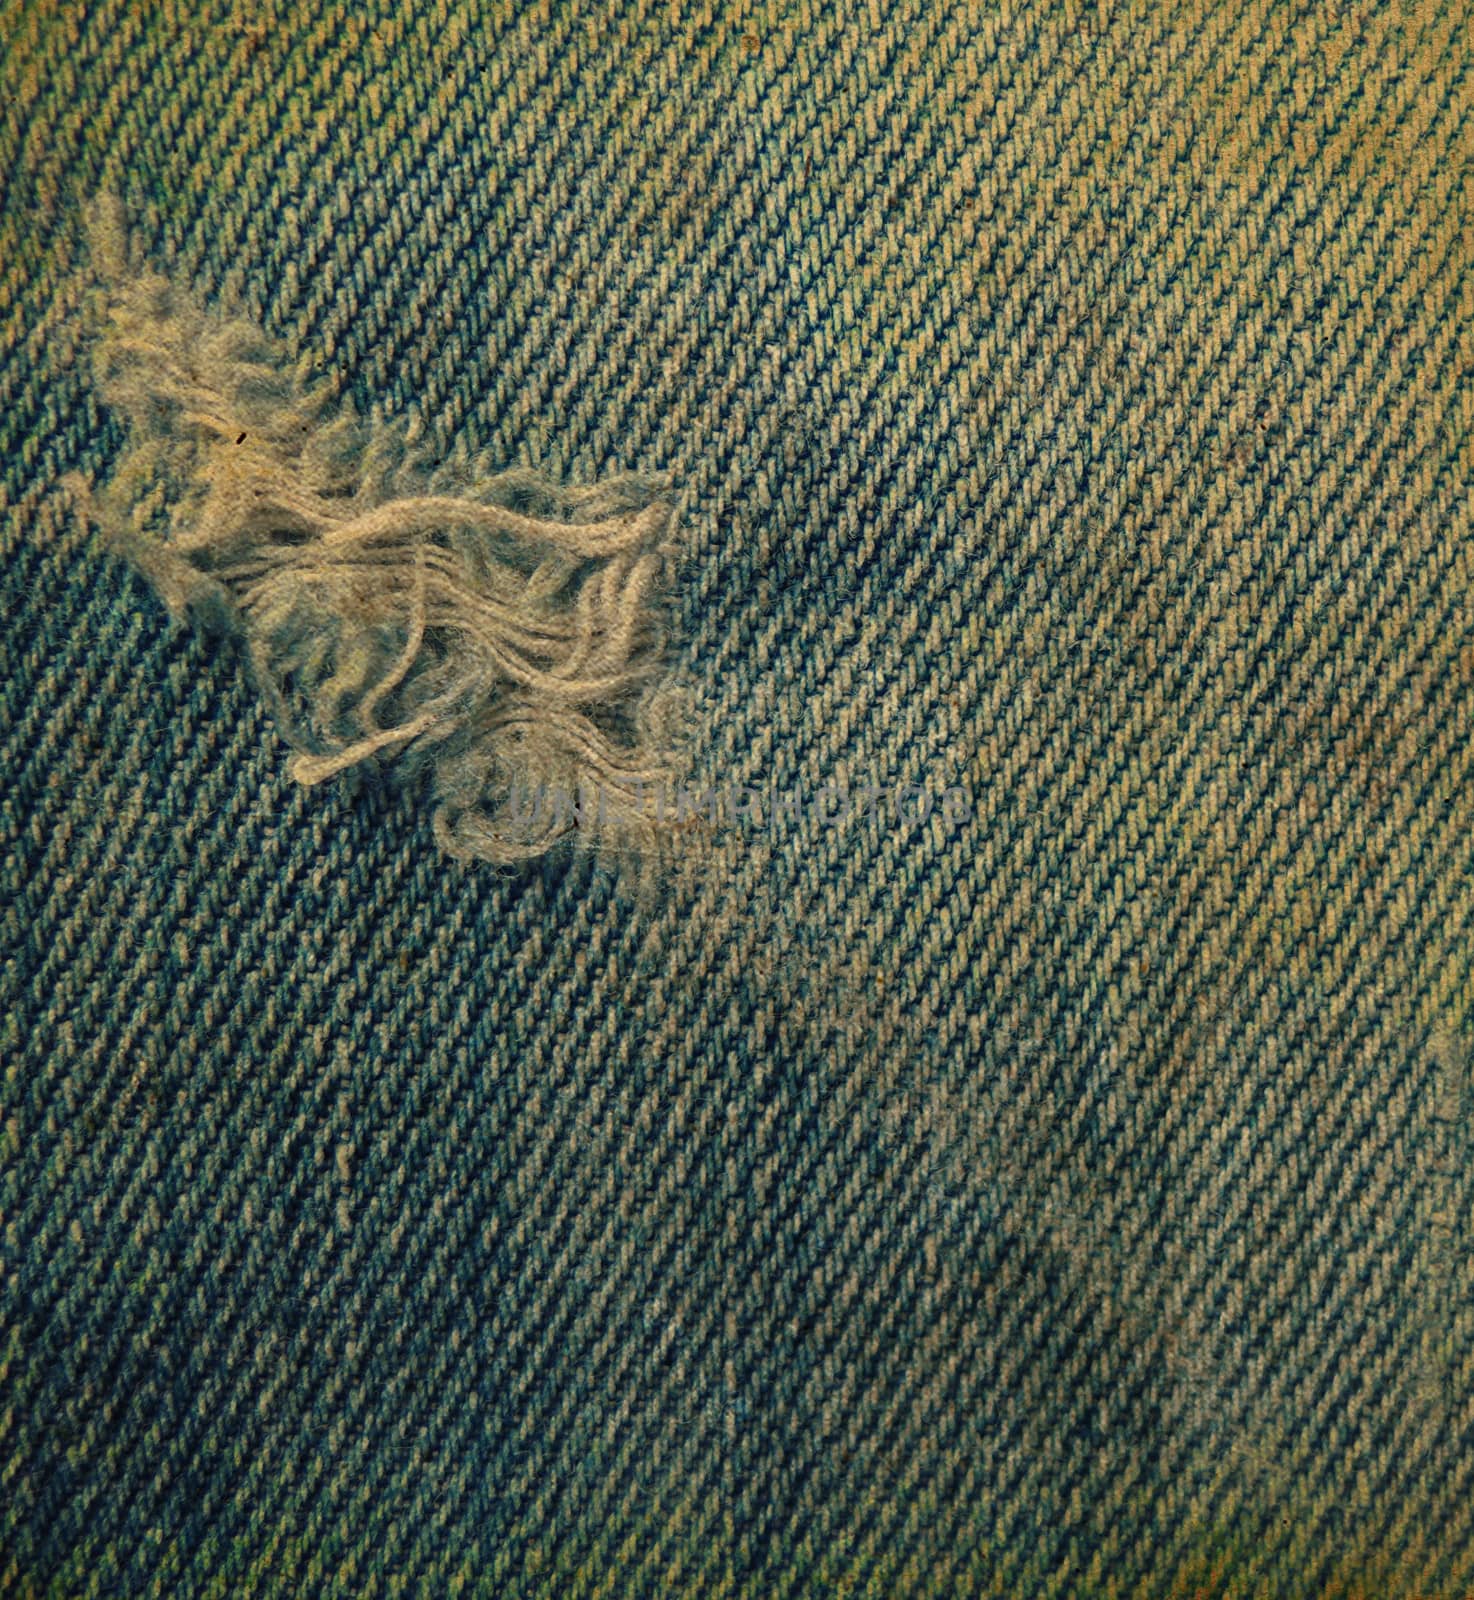 Vintage blue jean texture with a hole and threads showing